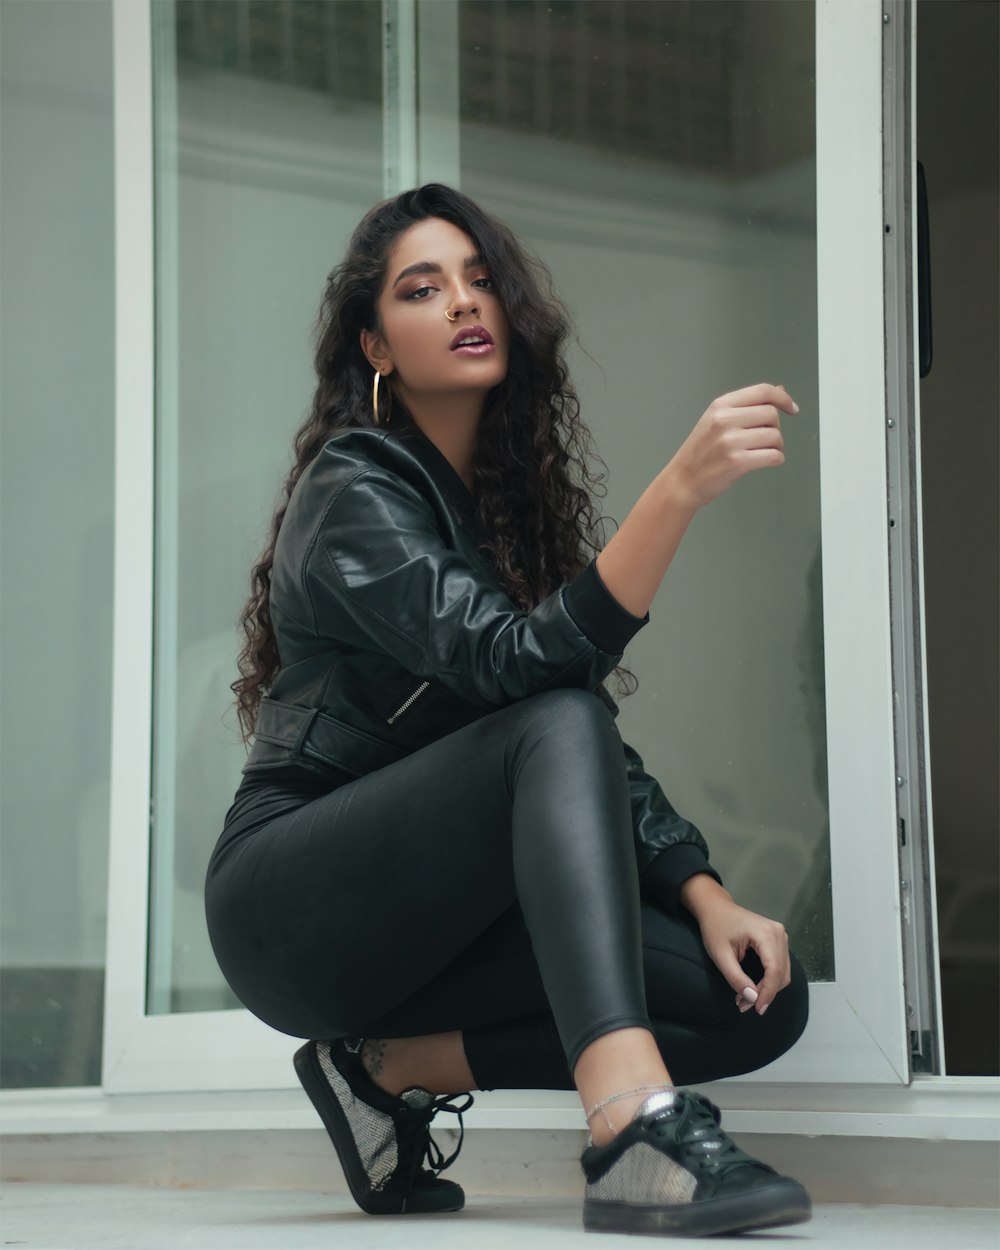 woman in black leather jacket and black leggings sitting on glass window